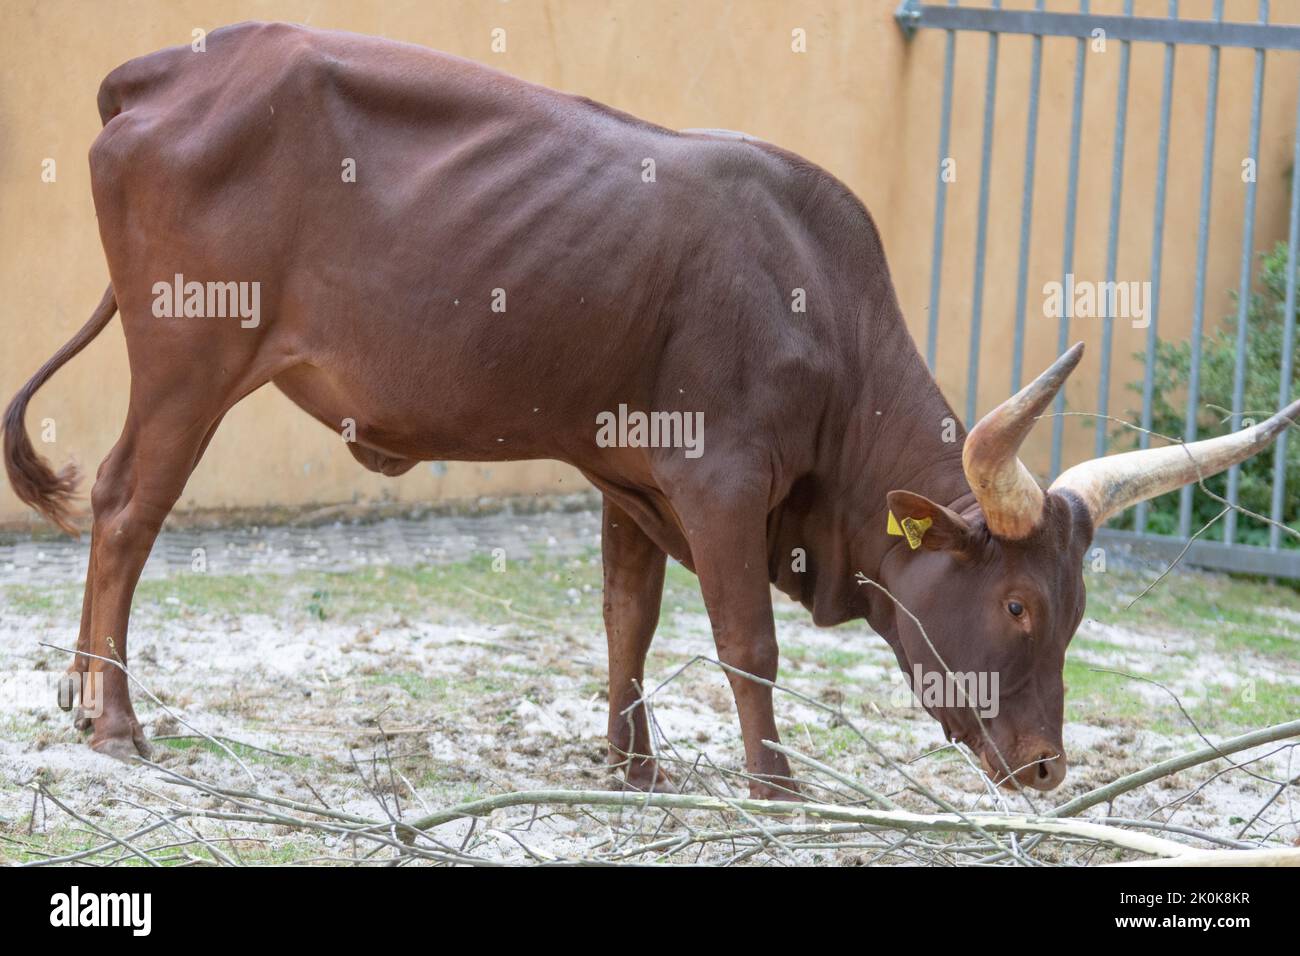 The Watussirind or Ankolerind is a breed of domestic cattle in East Africa. It was created by crossing ancient Egyptian longhorn cattle with humpback Stock Photo